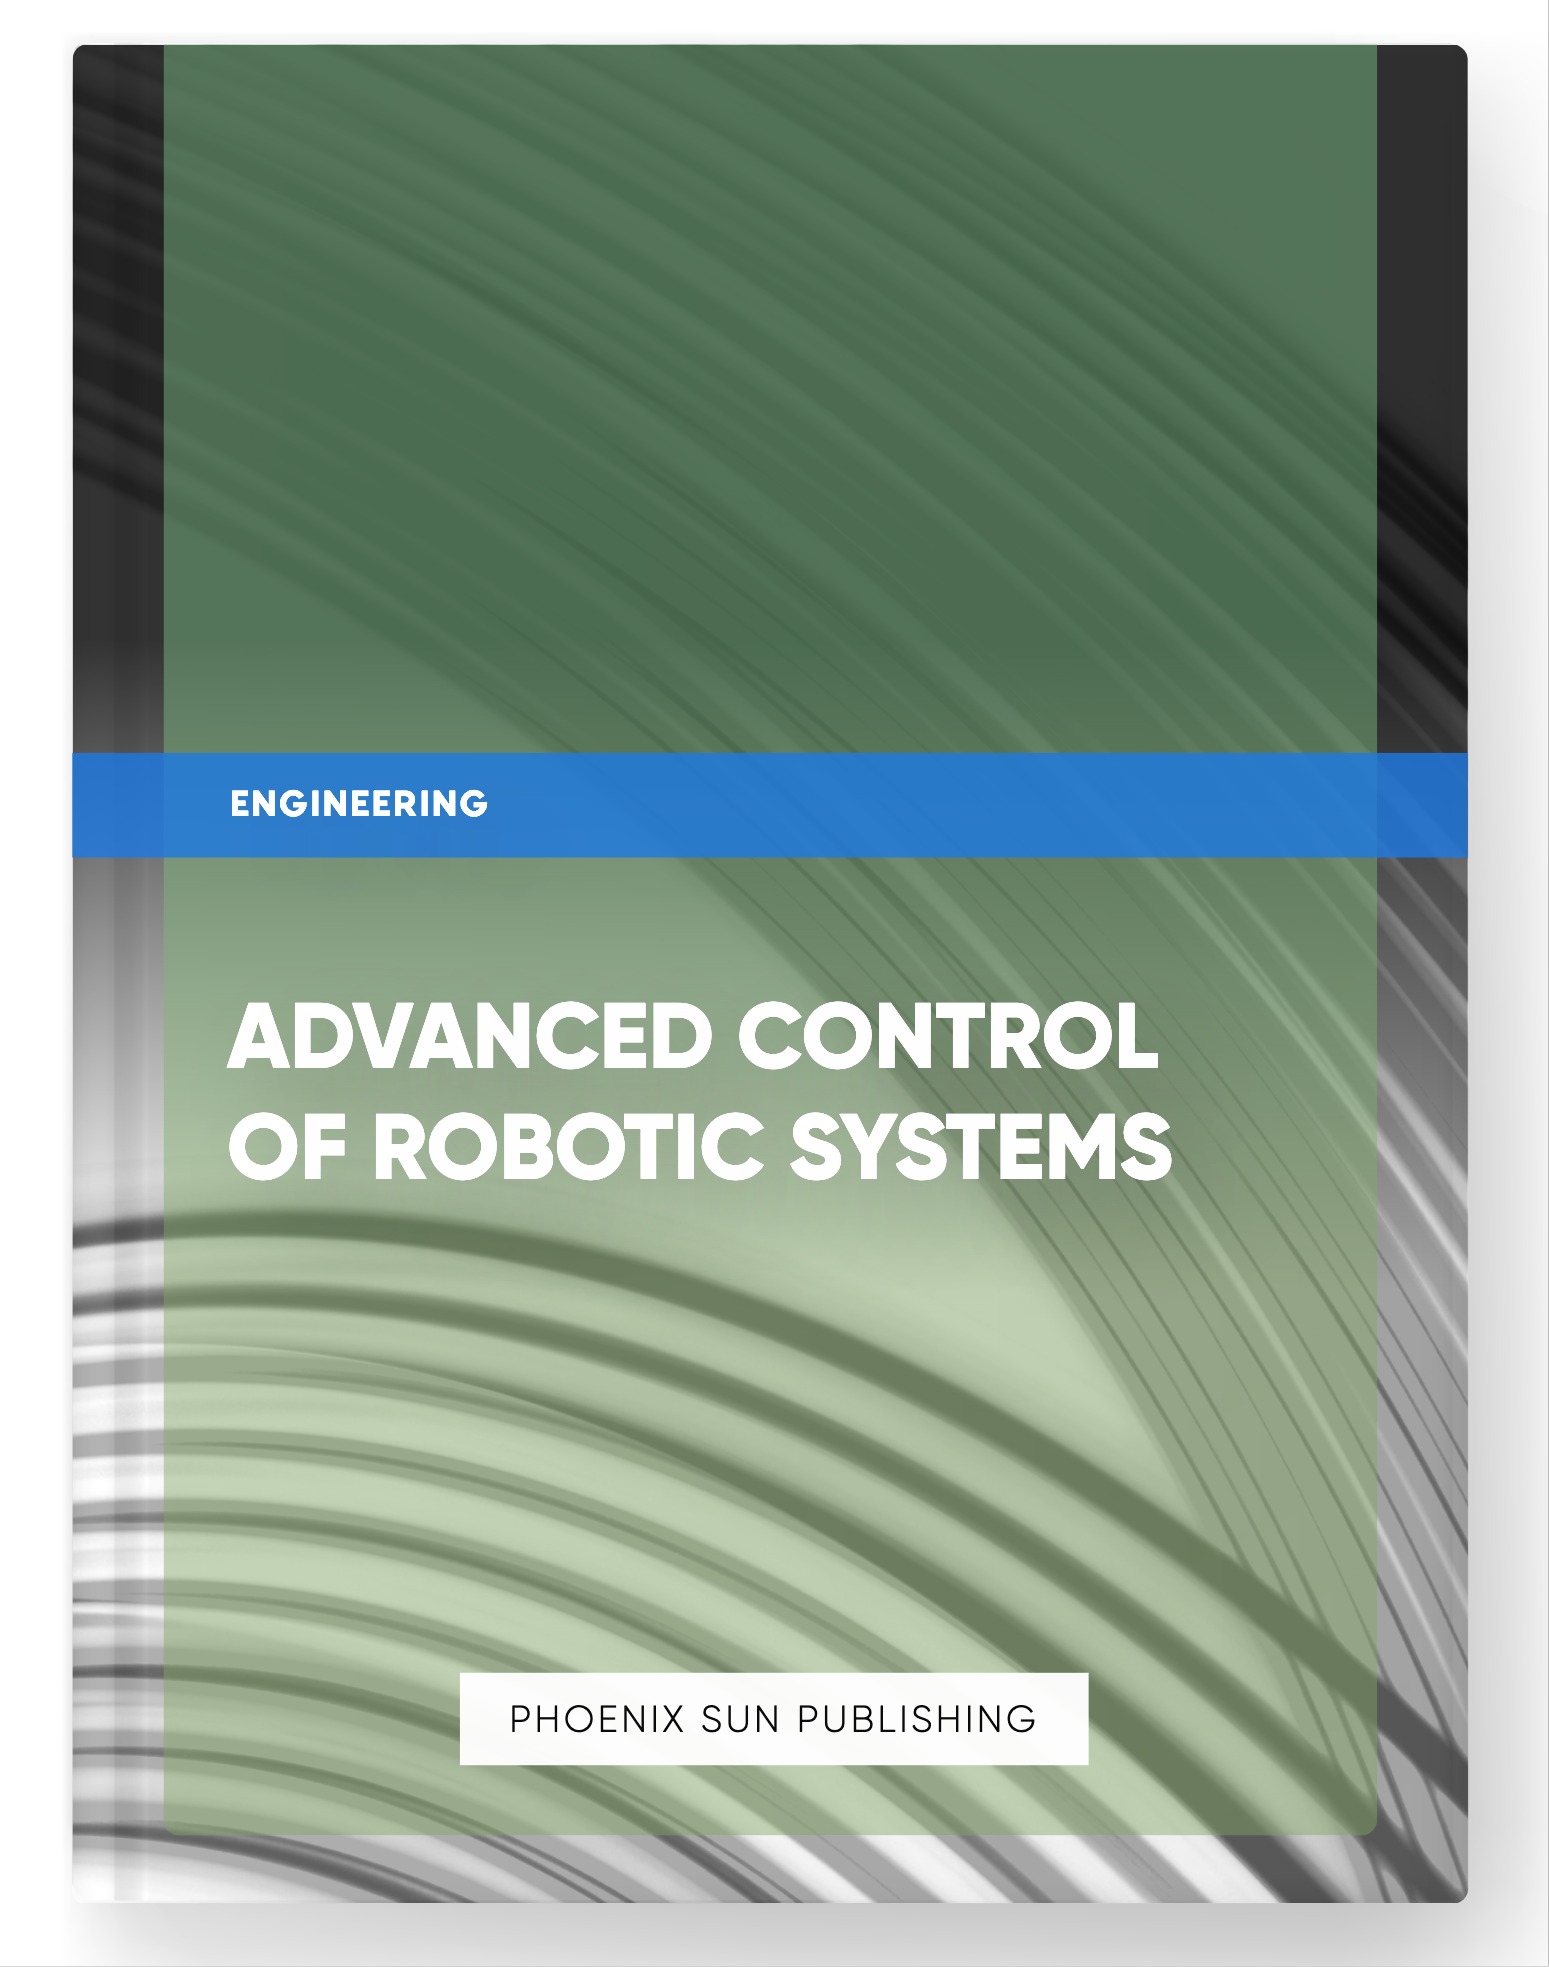 Advanced Control of Robotic Systems